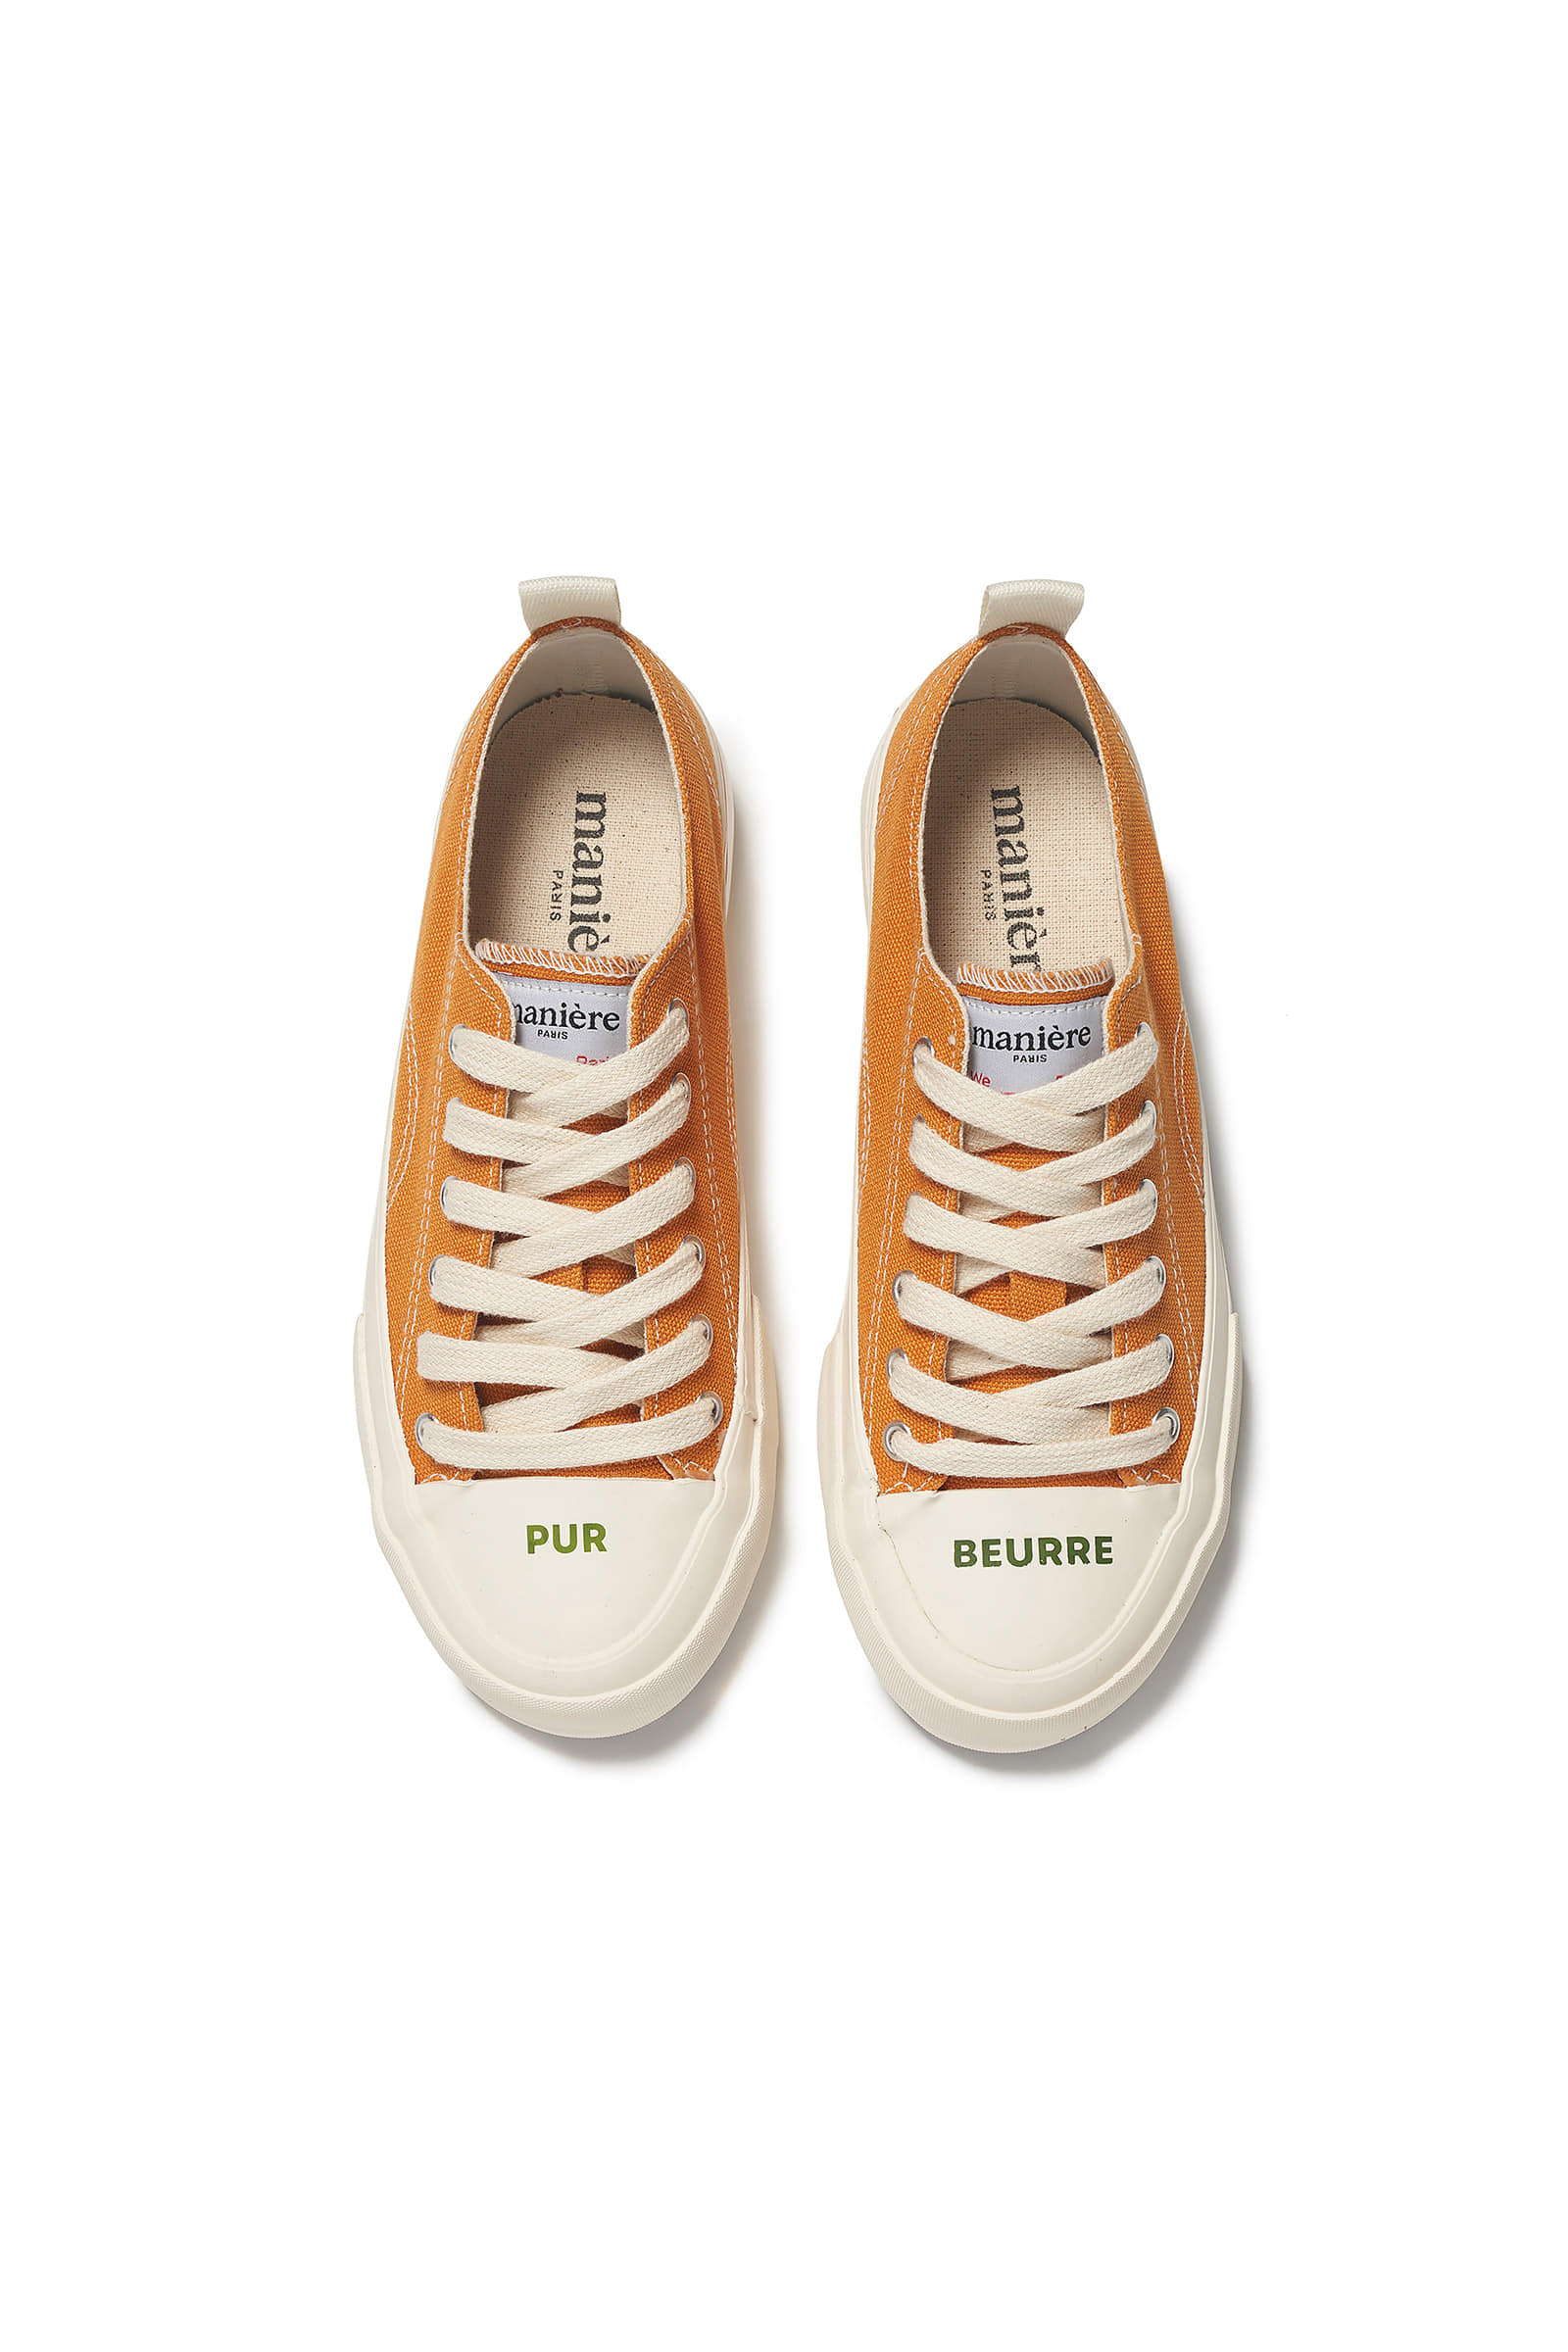 ep.2 Pur Beurre Sneakers(Mustard)